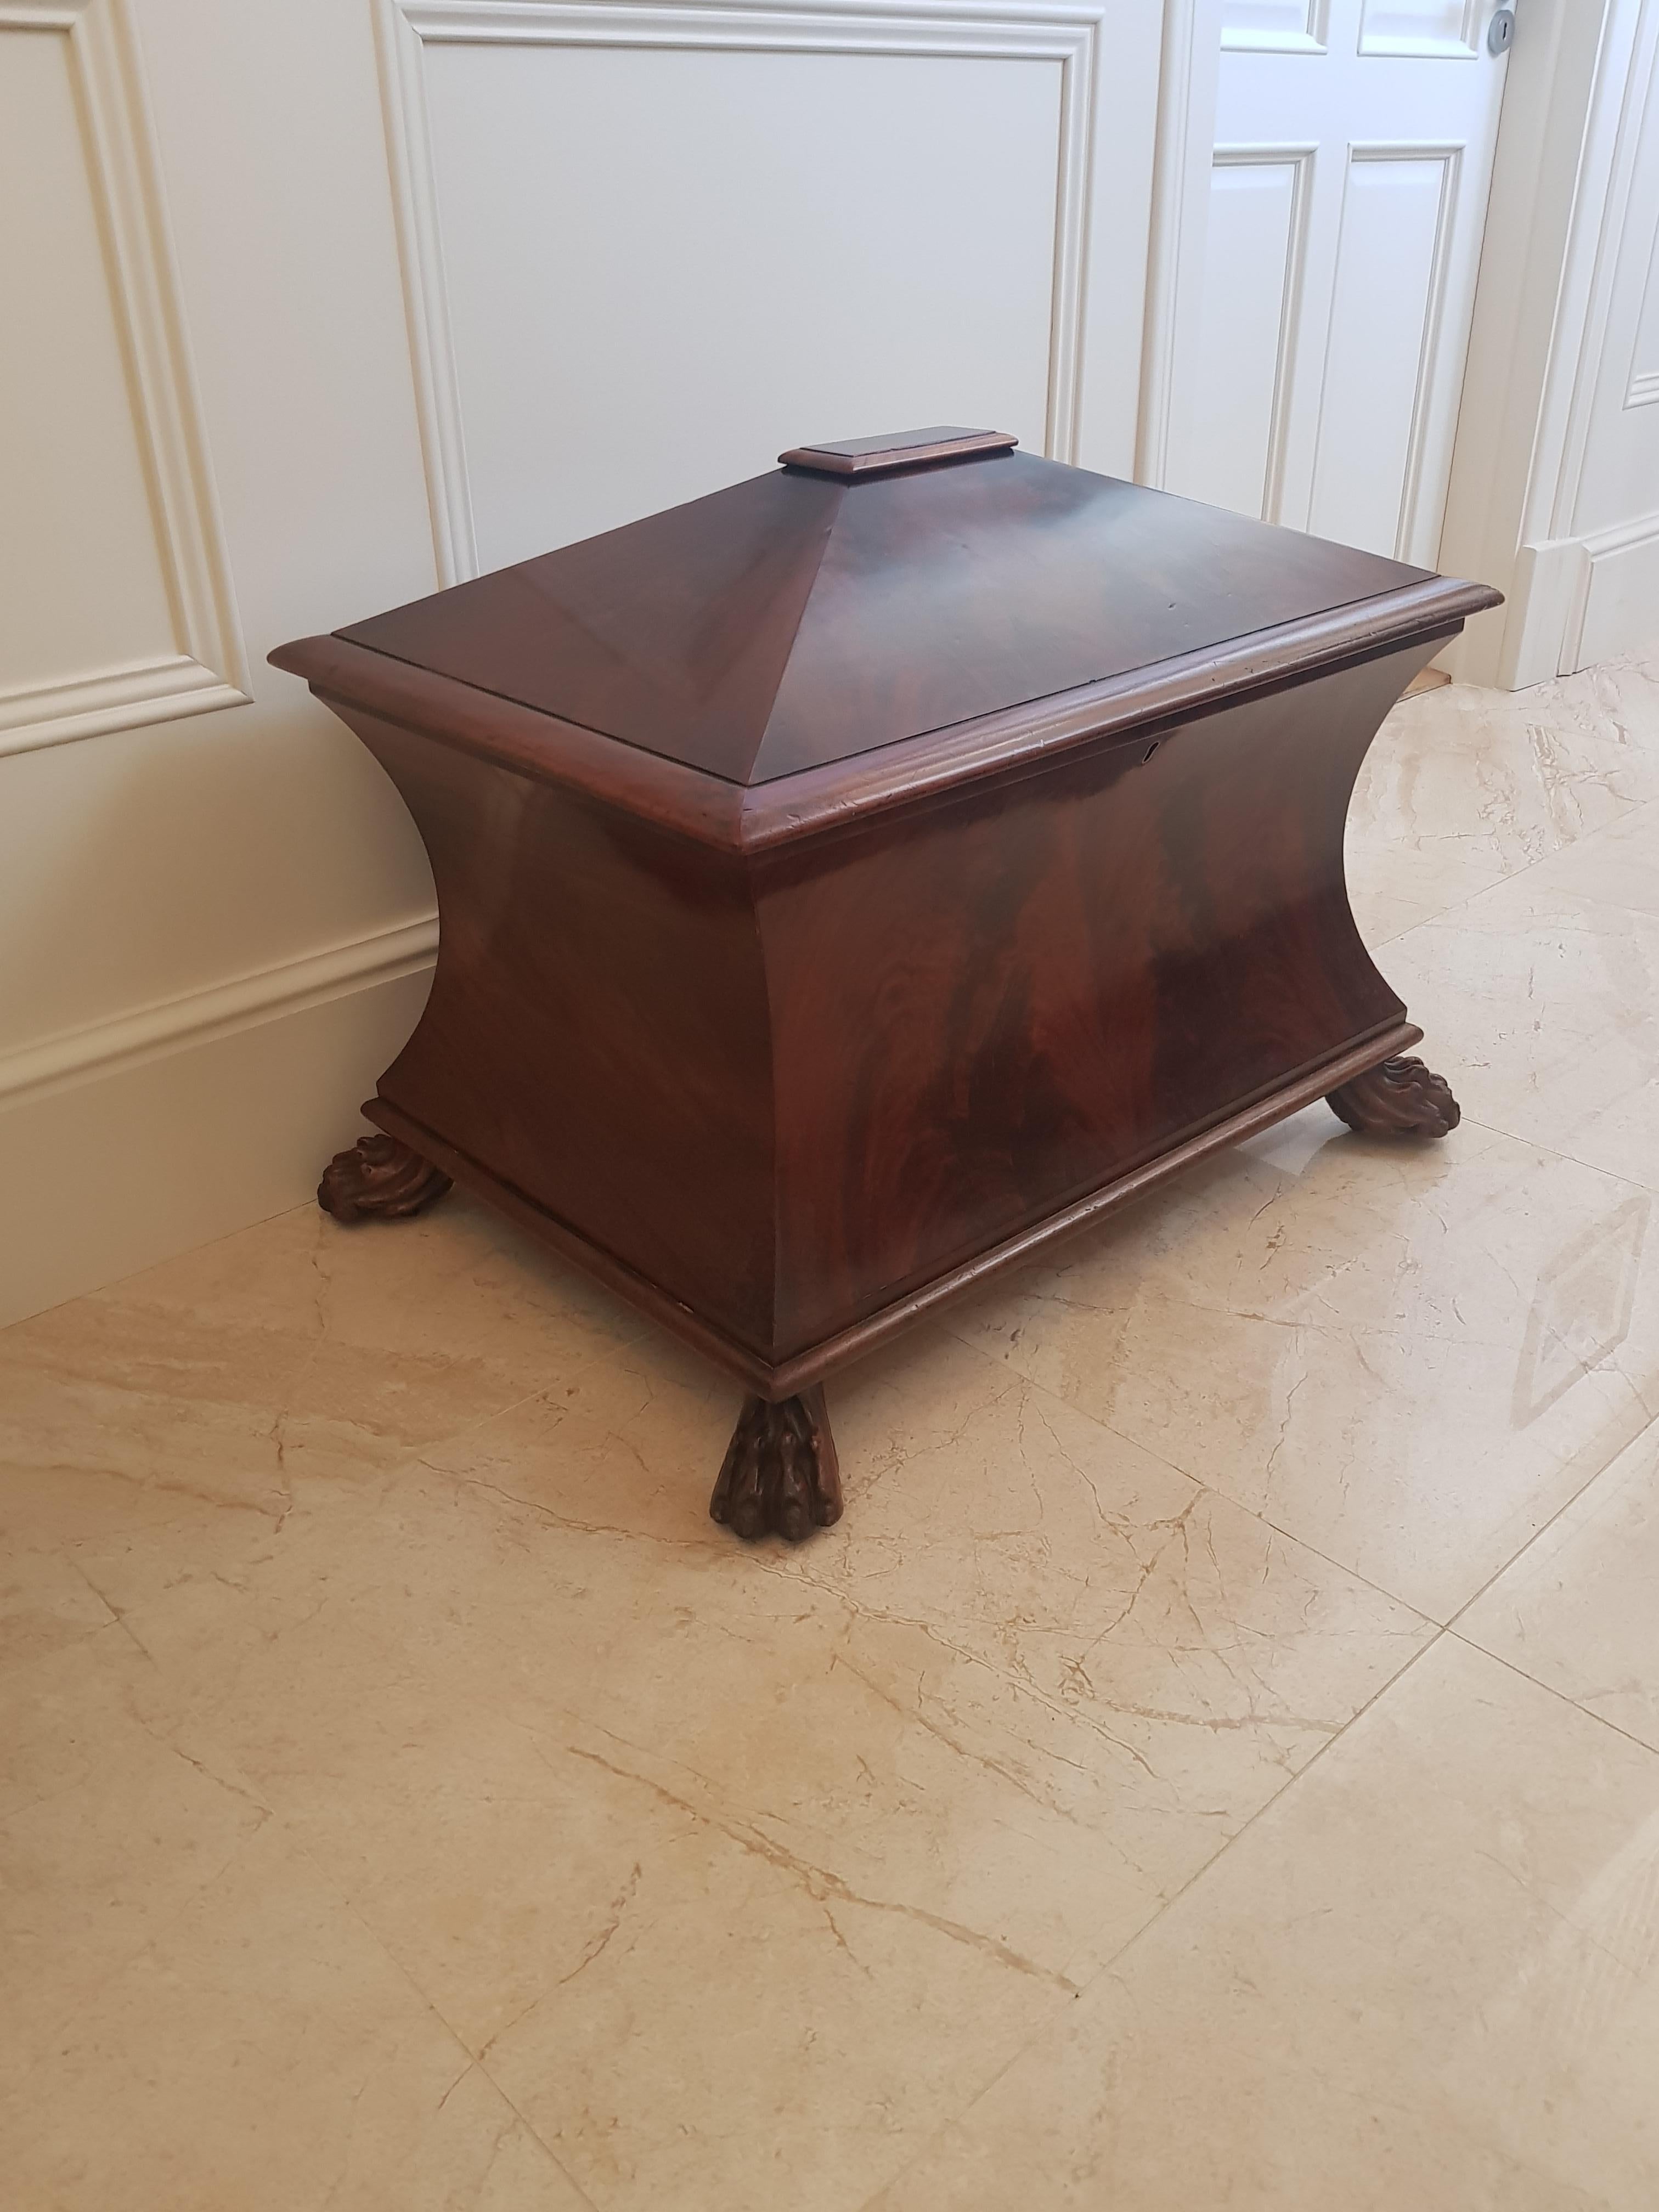 A large and exceptionally rare flared mahogany Irish George IV Cellarette stamped by Mack Williams & Gibton.

Complete with original wooden lining for wine bottle storage and very unusual to find stamped furniture from this illustrious Dublin